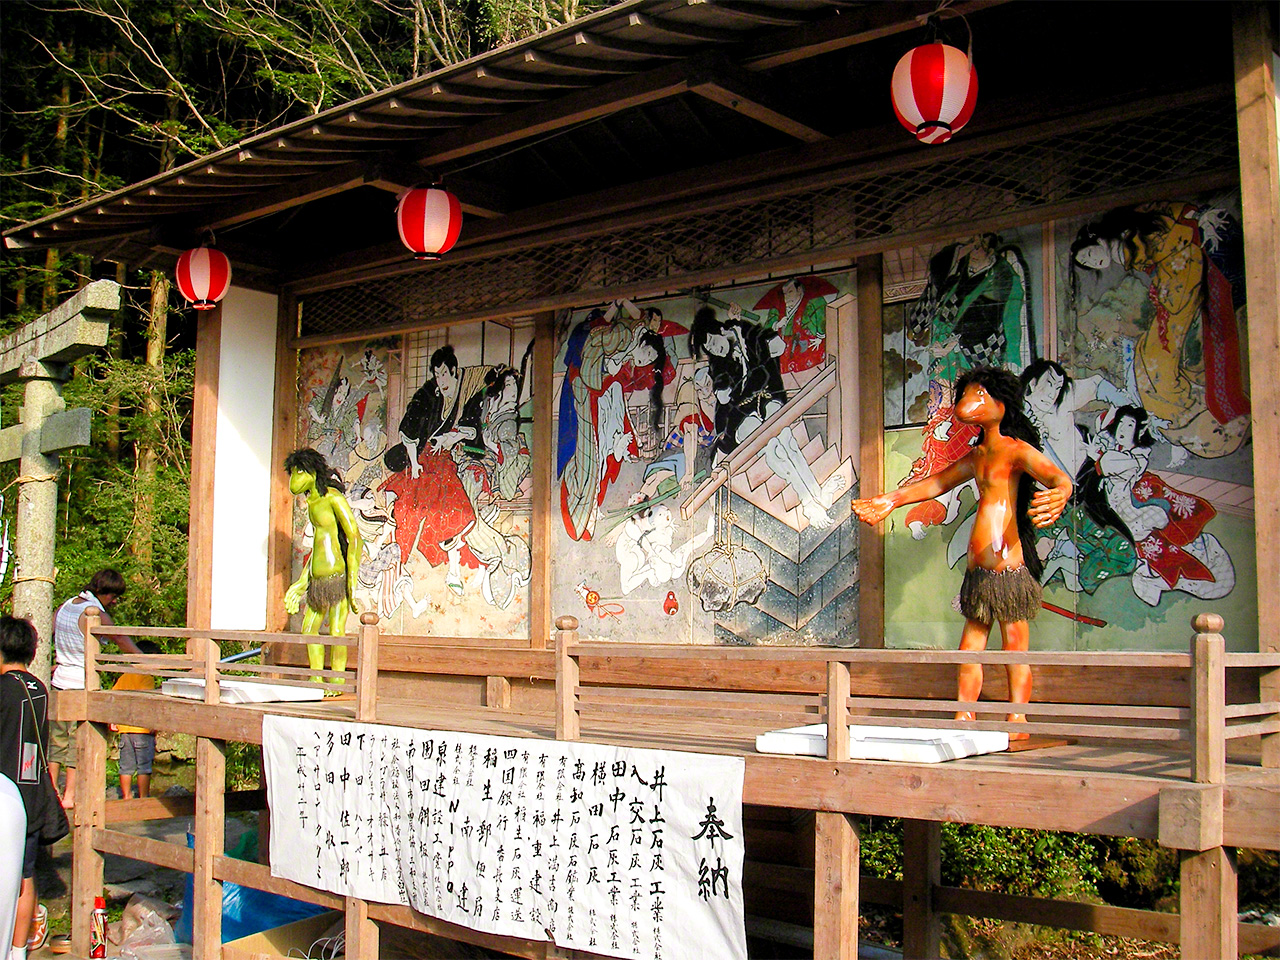 Kahaku Shrine in Nankoku, Kōchi Prefecture, has a kappa festival each year, based on the story of a kappa saved by the head priest of the shrine after it was caught trying to pull a horse into the river. It promised not to drown the people of the village in the future and became celebrated as a kami. (© Kagawa Masanobu)